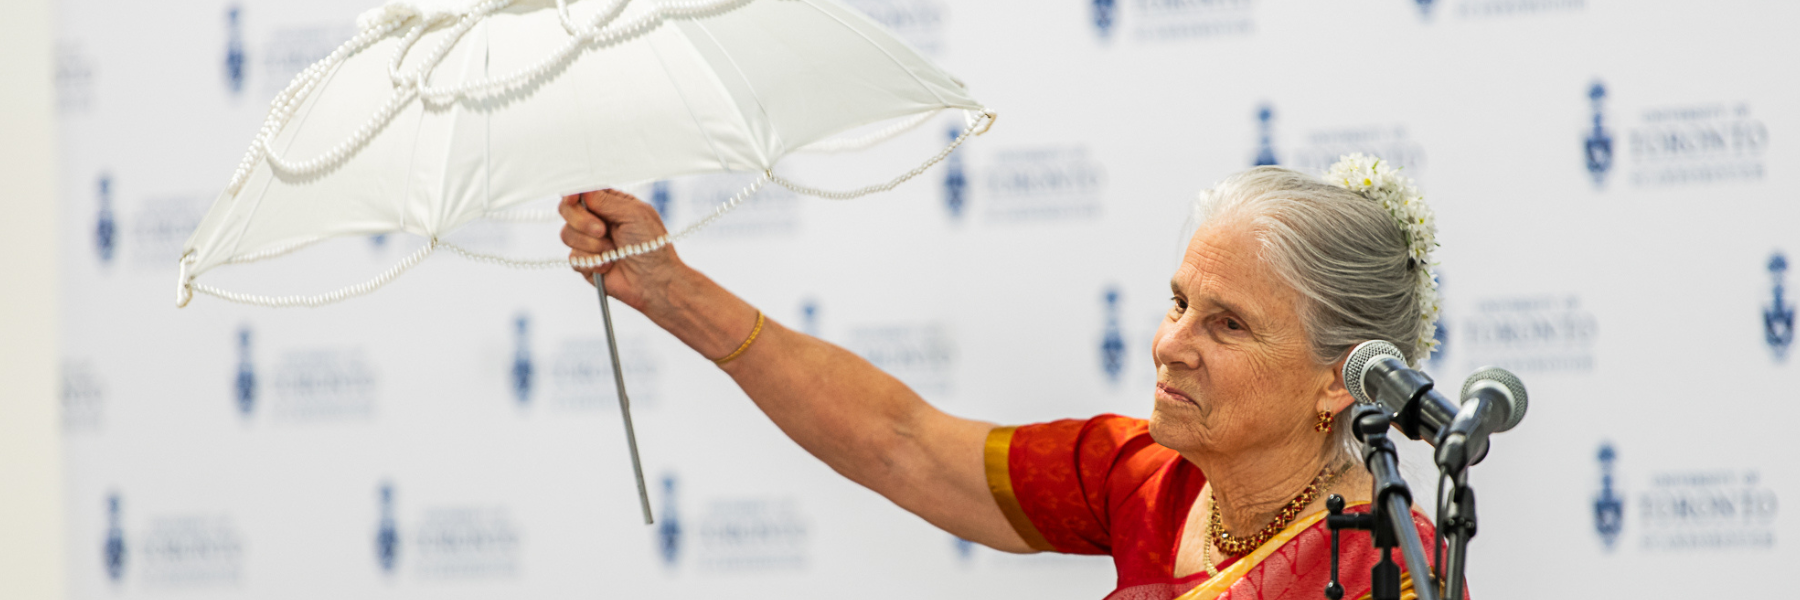 Professor Brenda Beck holding up a white pearled umbrella in front of a step and repeat with UTSC logo